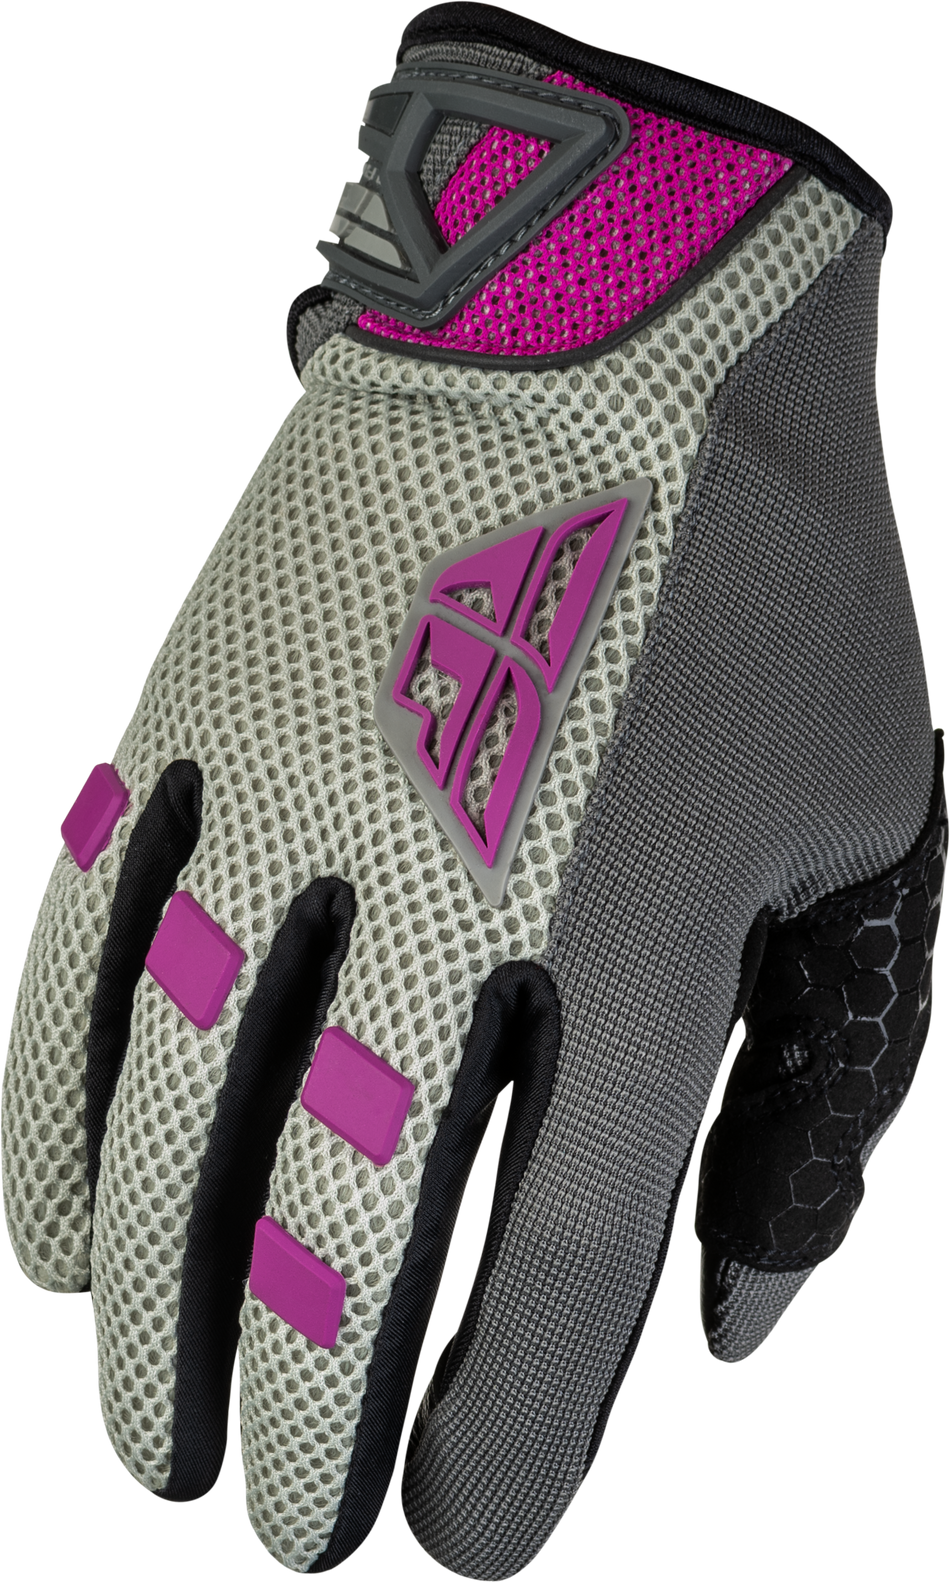 FLY RACING Women's Coolpro Gloves Grey/Pink Md 476-6216M